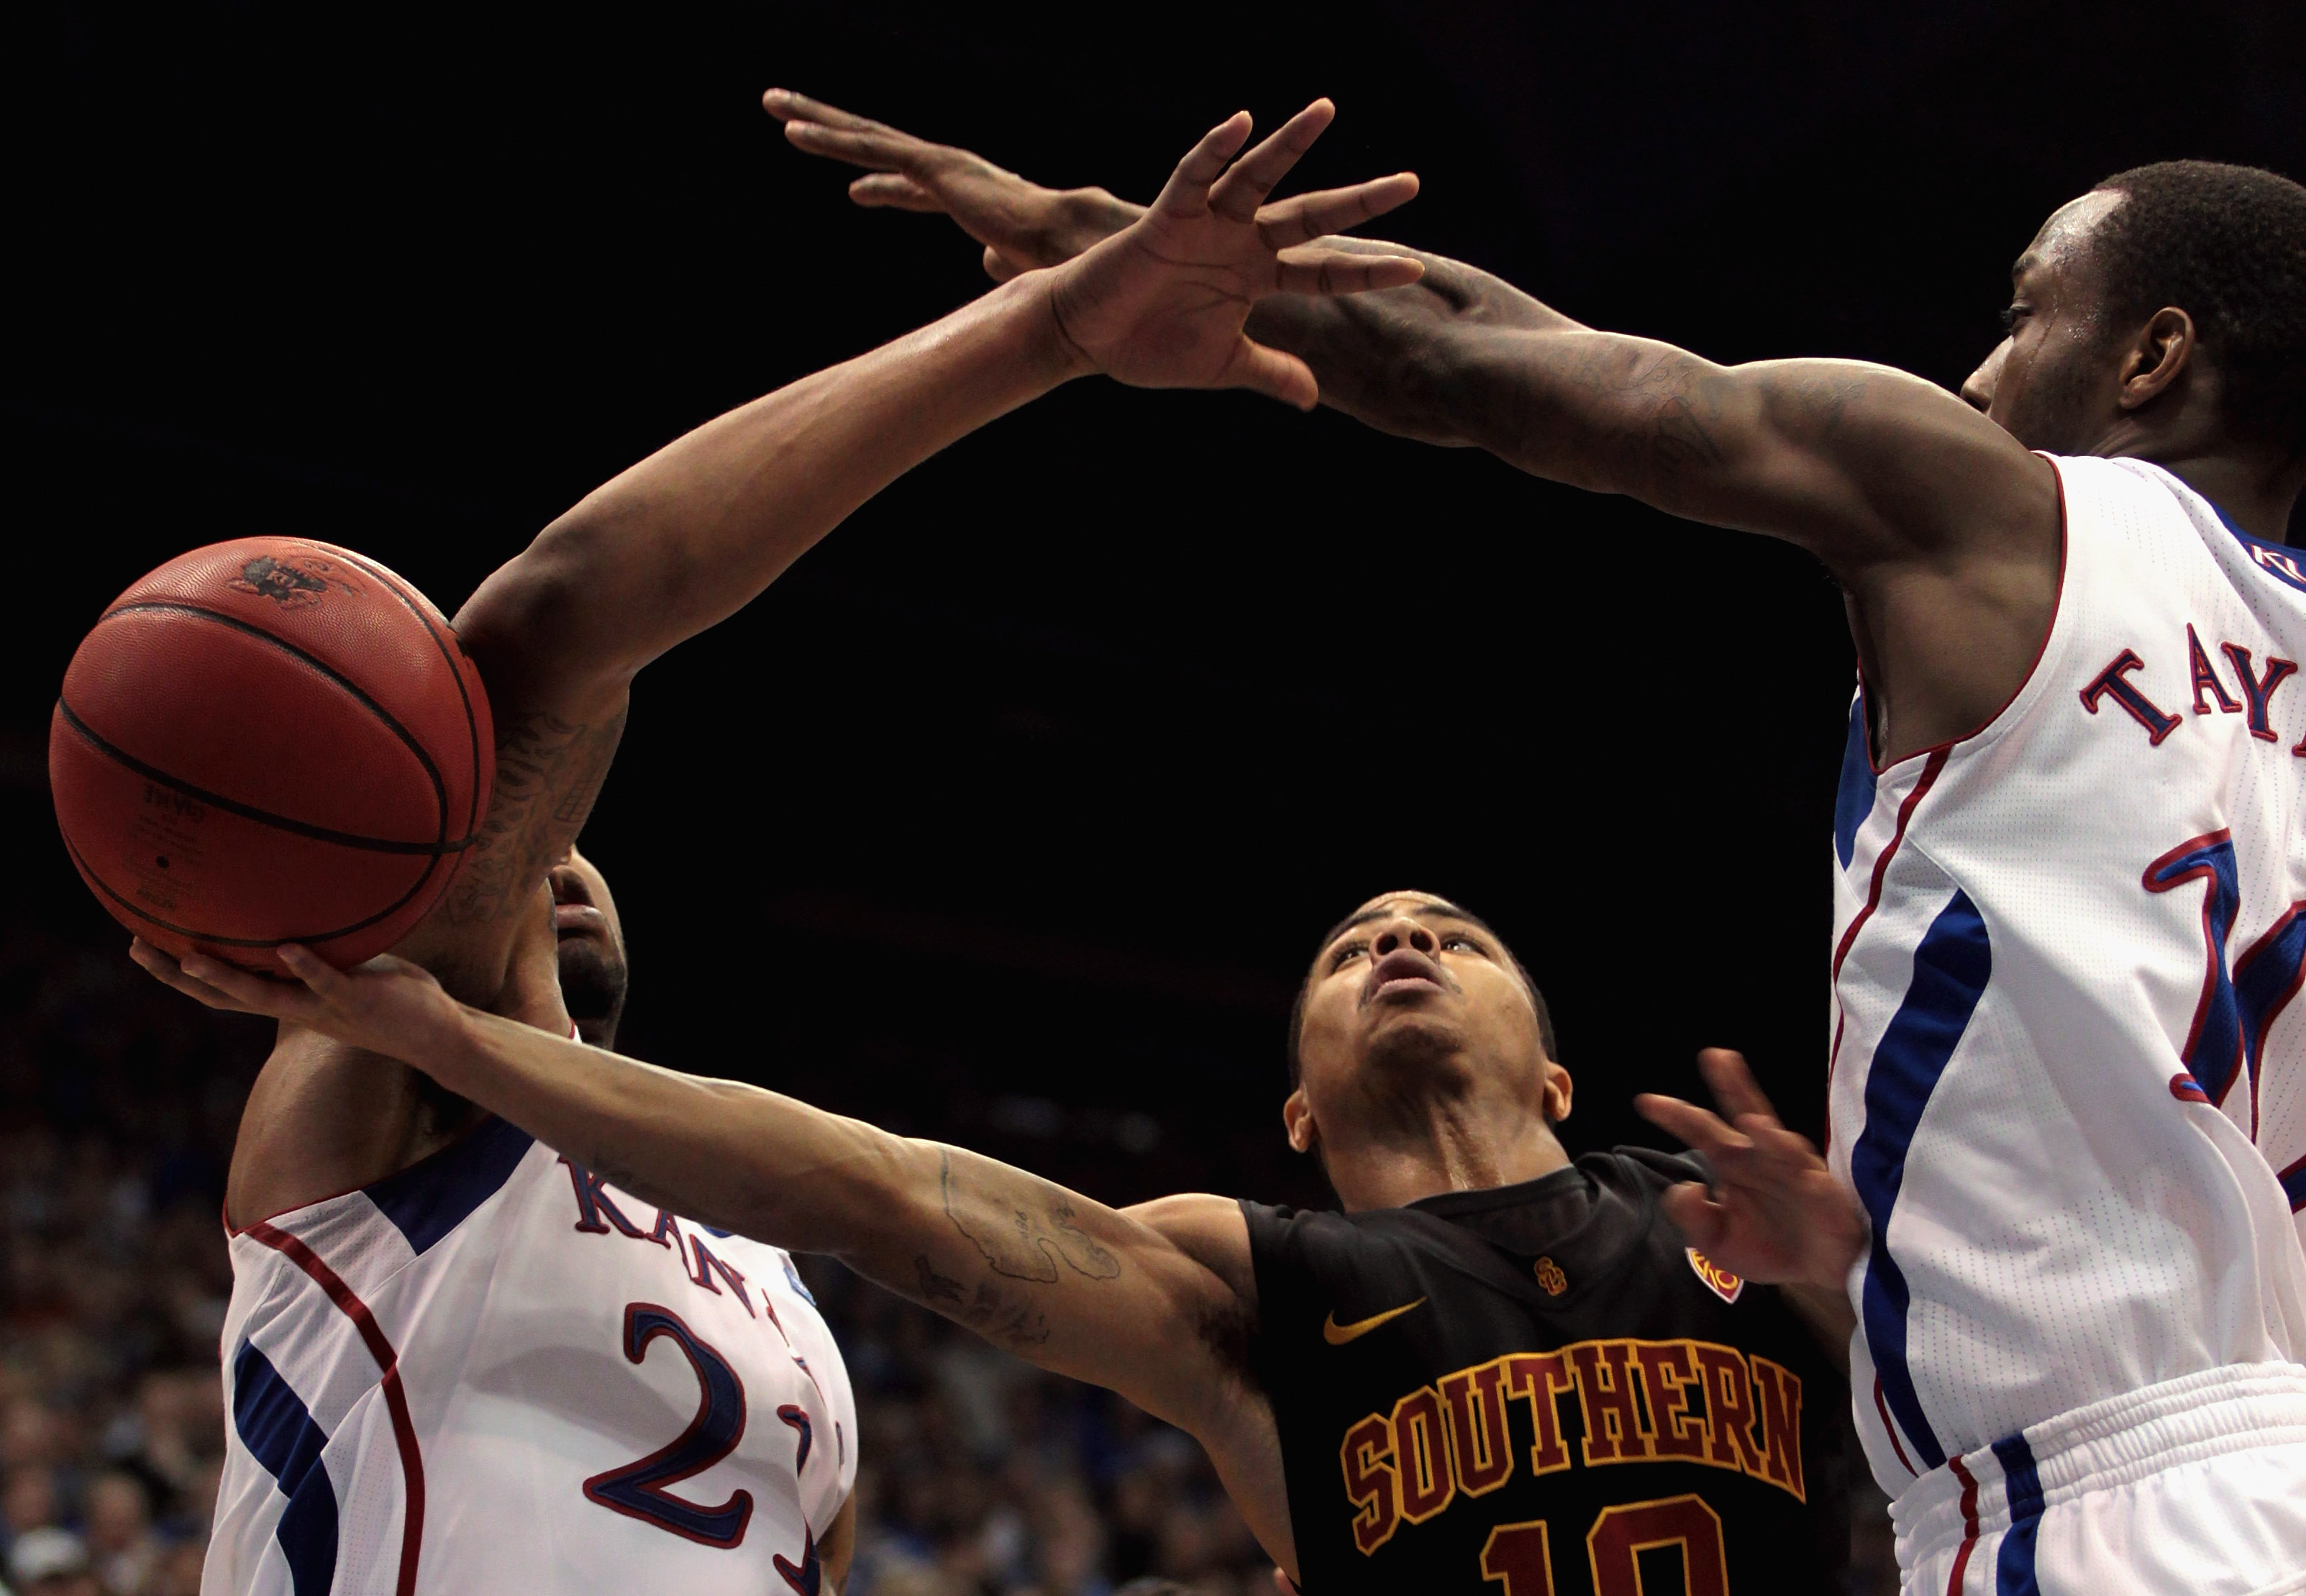 LAWRENCE, KS - DECEMBER 18:  Maurice Jones #10 of the USC Trojans shoots as Markieff Morris #21 and Tyshawn Taylor #10 of the Kansas Jayhawks defend during the game on December 18, 2010 at Allen Fieldhouse in Lawrence, Kansas.  (Photo by Jamie Squire/Gett